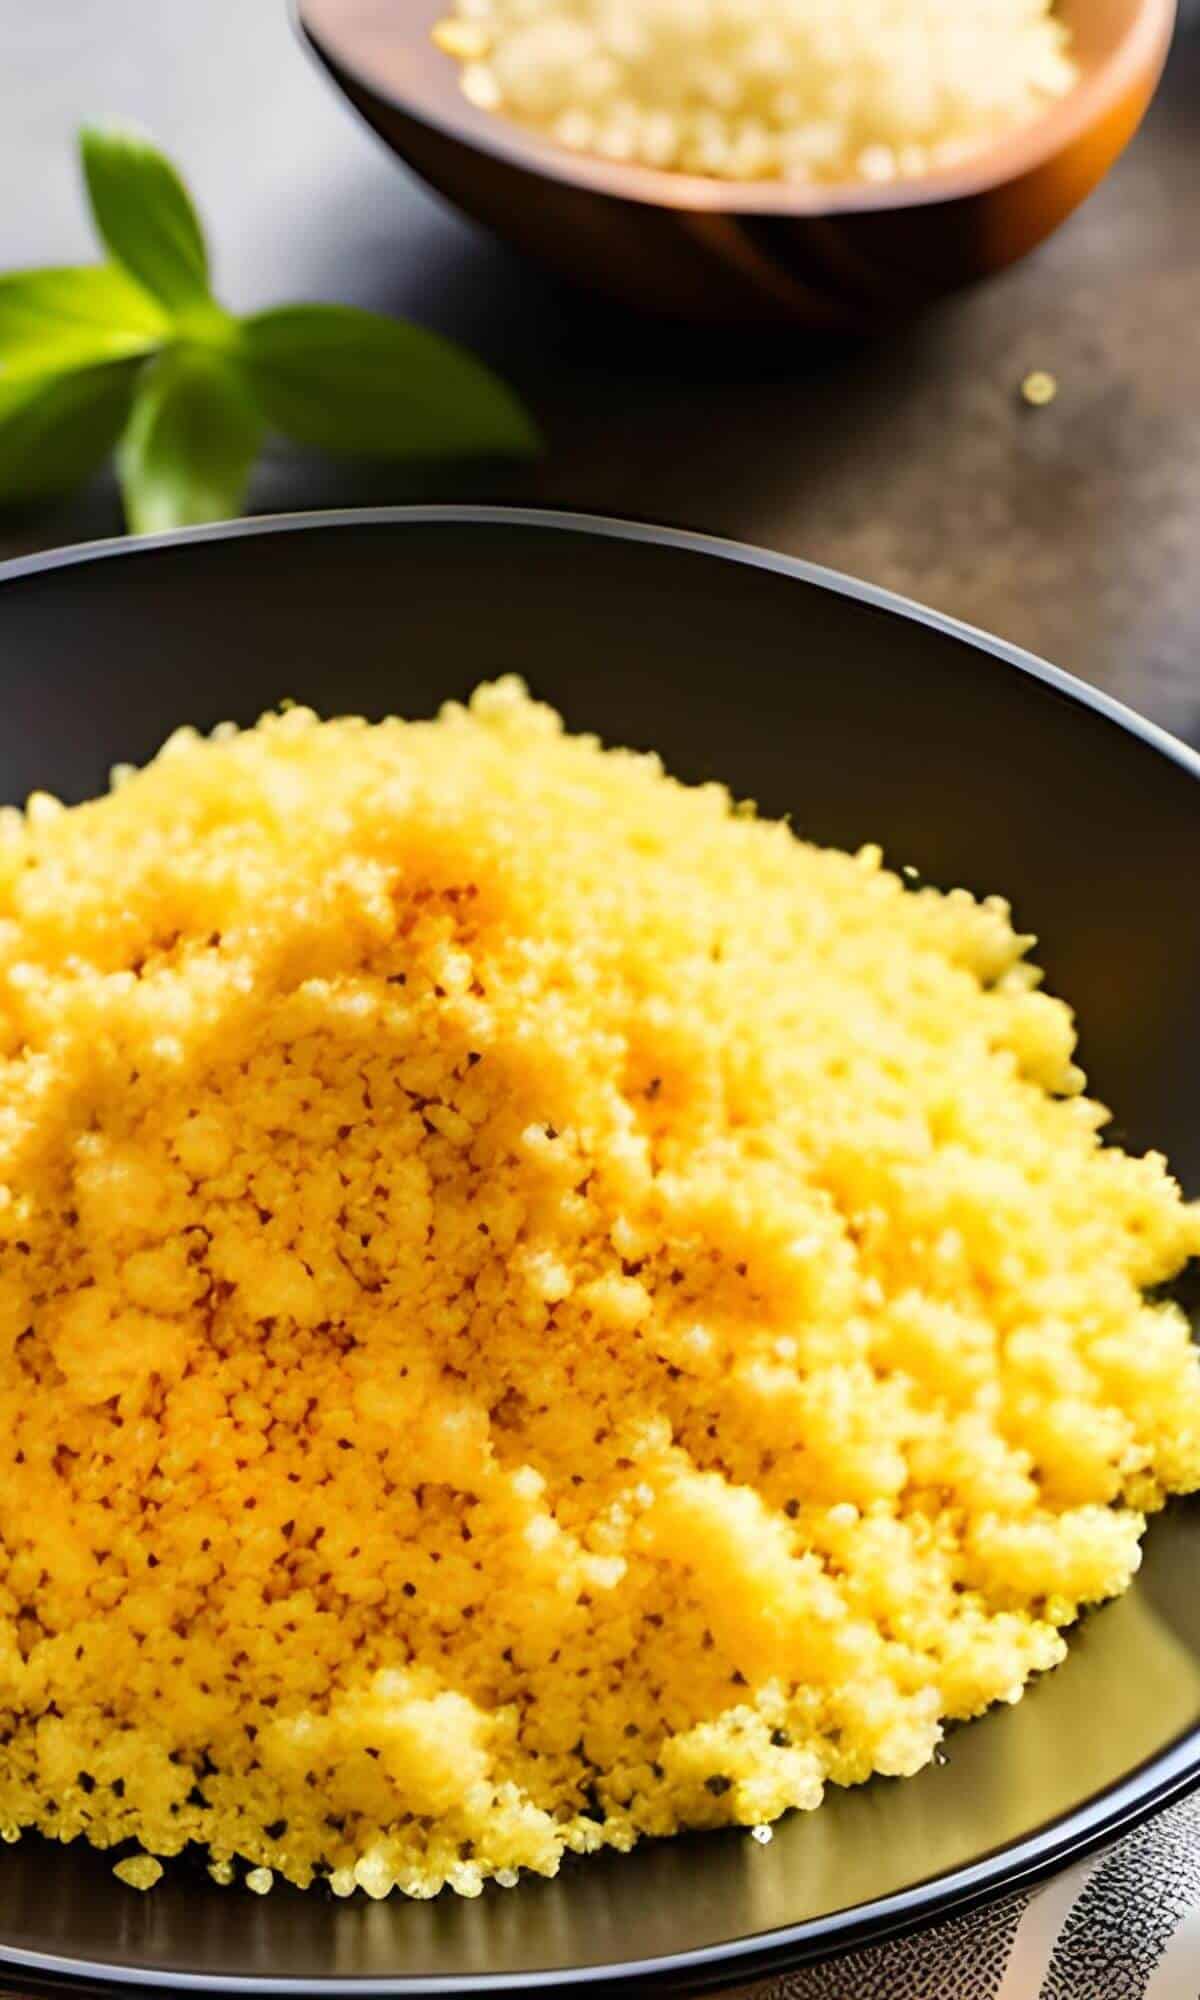 A plate full of yellow couscous.